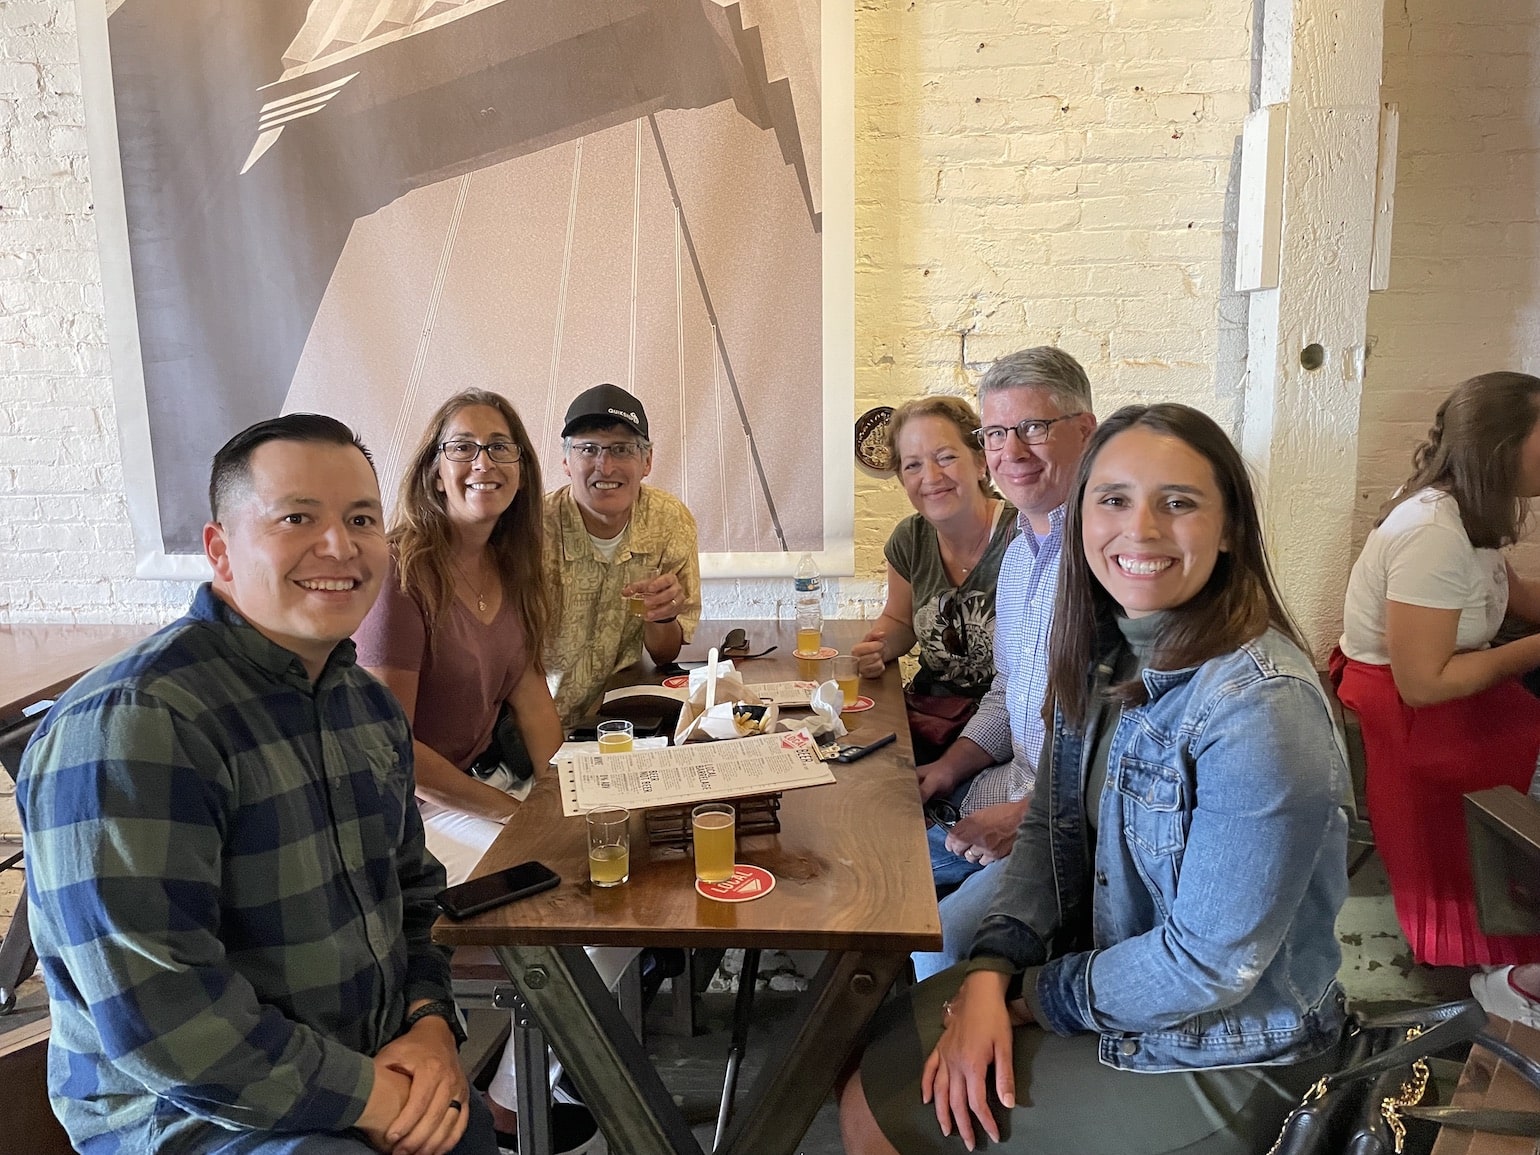 Family outing at SF brewery